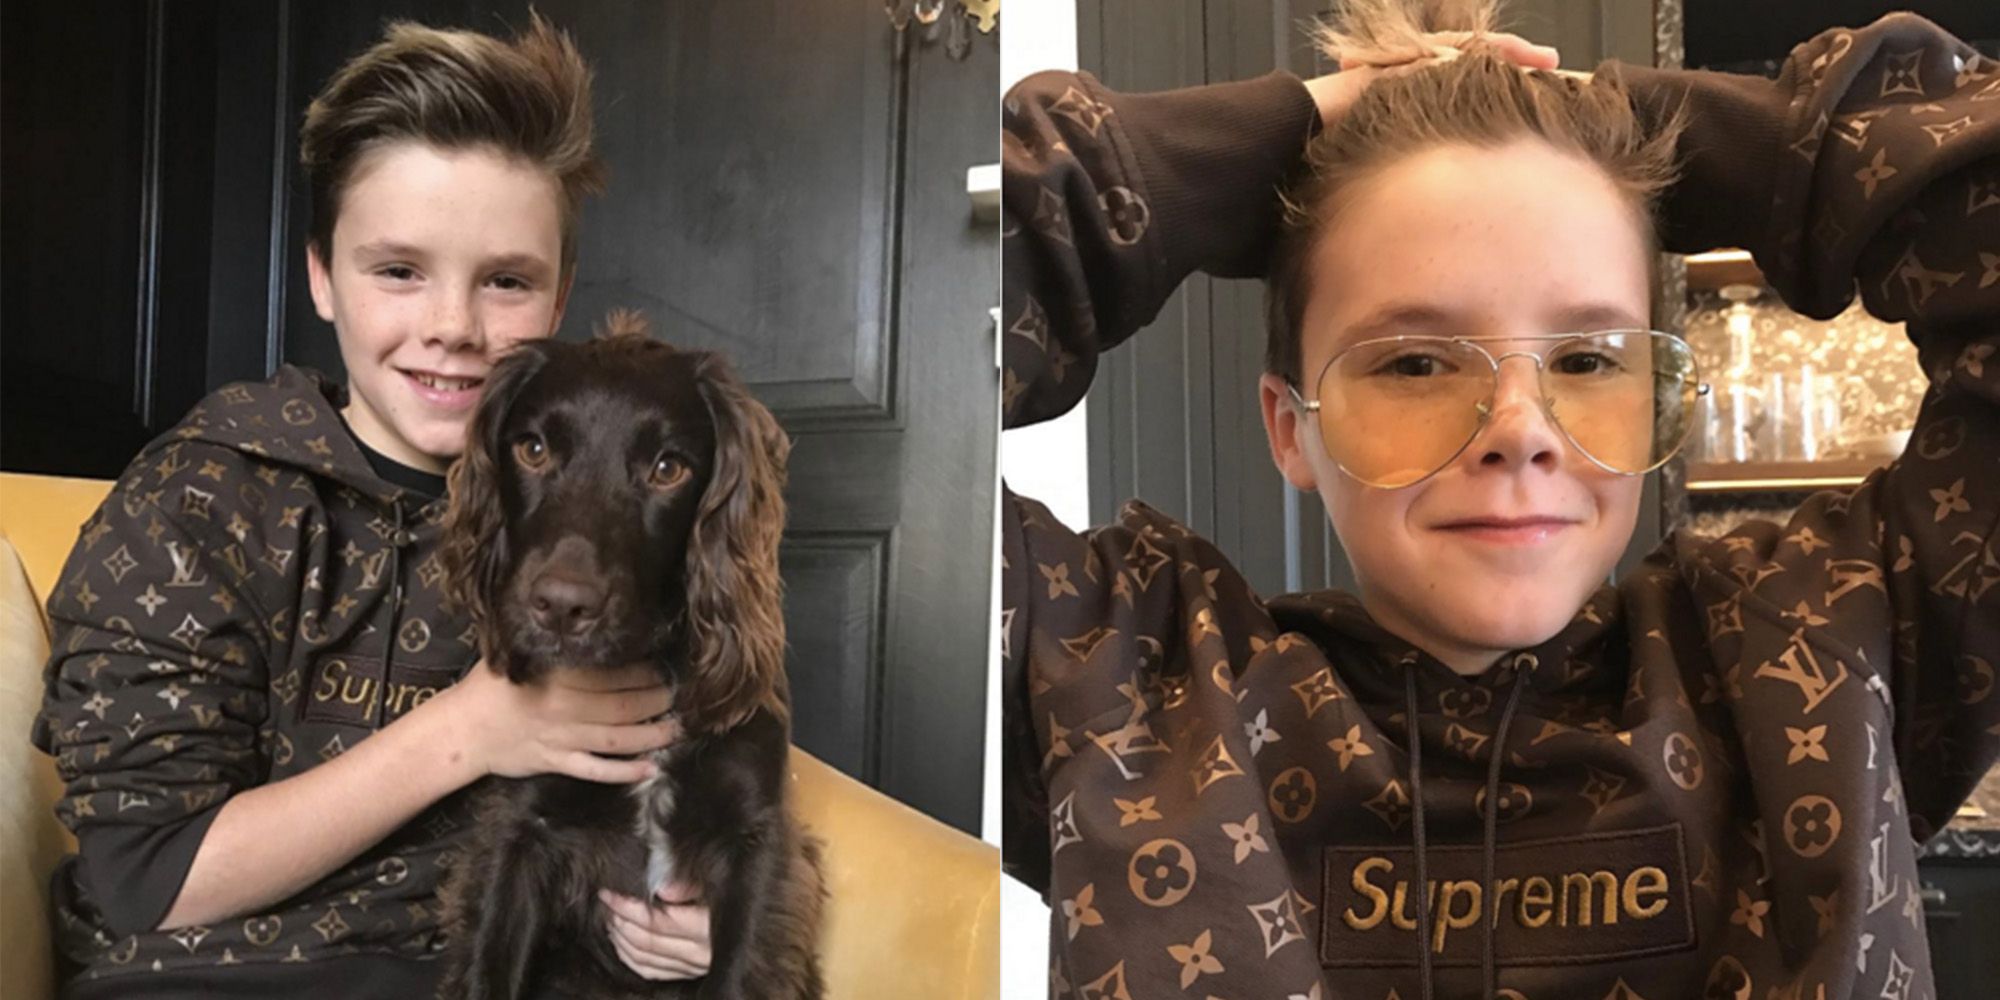 Welcome To The Louis Vuitton x Supreme Squad, Cruz Beckham  Louis vuitton  hoodie, Louis vuitton supreme, Luis vuitton